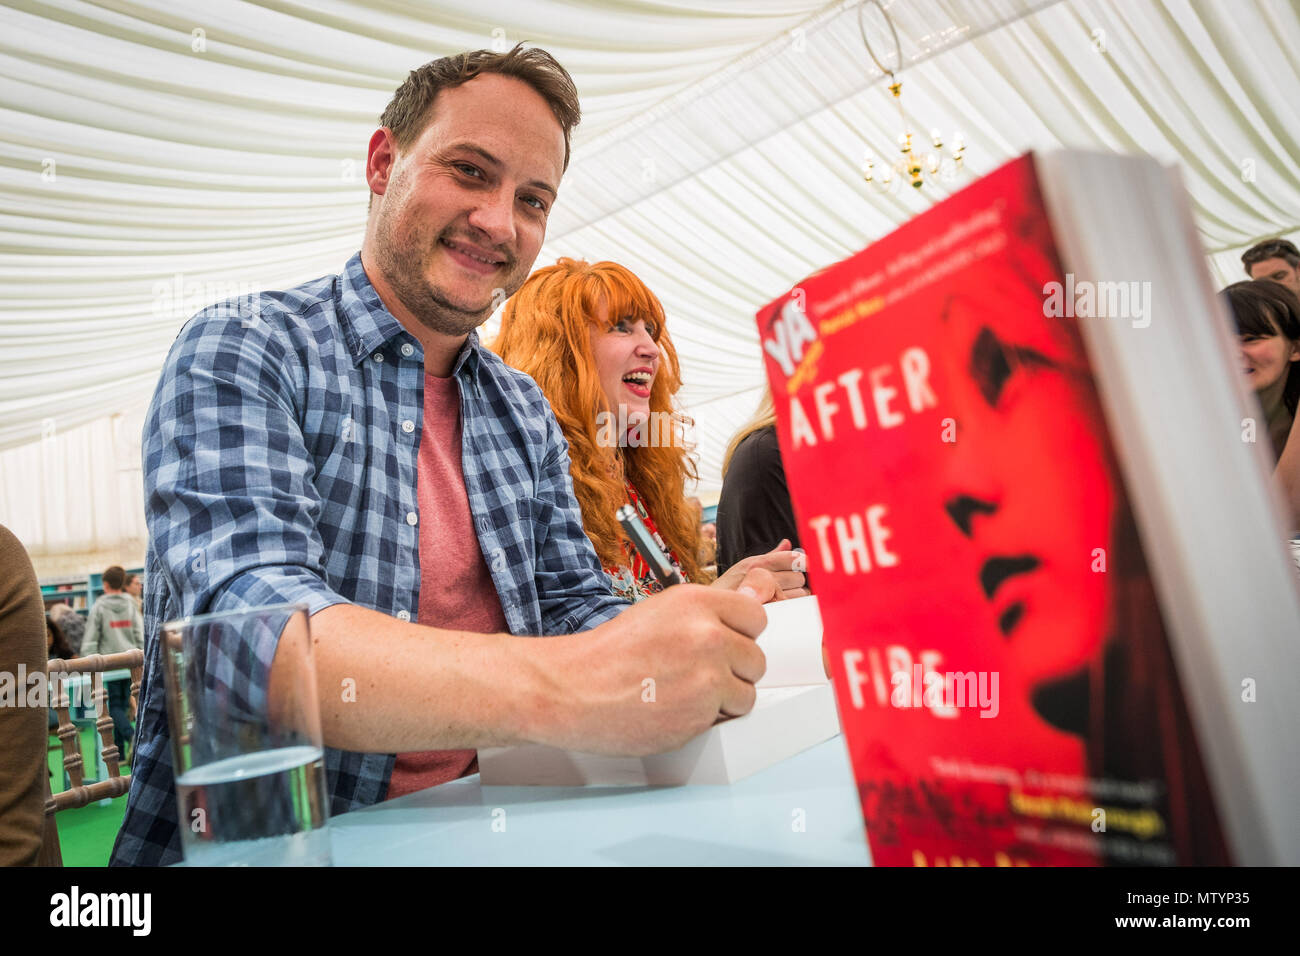 The Hay Literature Festival, Hay on Wye, Wales UK Thursday, 31 May 2018.   Writer WILL HILL, who has won the 2018 The Bookseller's YA (Young Adult)  for his novel 'After the Seige' . The prize was announced at a special cerrmony on the 8th day of the 31st annual Hay Festival of Literature and the Arts. Shown here signing copies of his winning book  in the festival bookshop after the event. Photo © Keith Morris / Alamy Live News Stock Photo